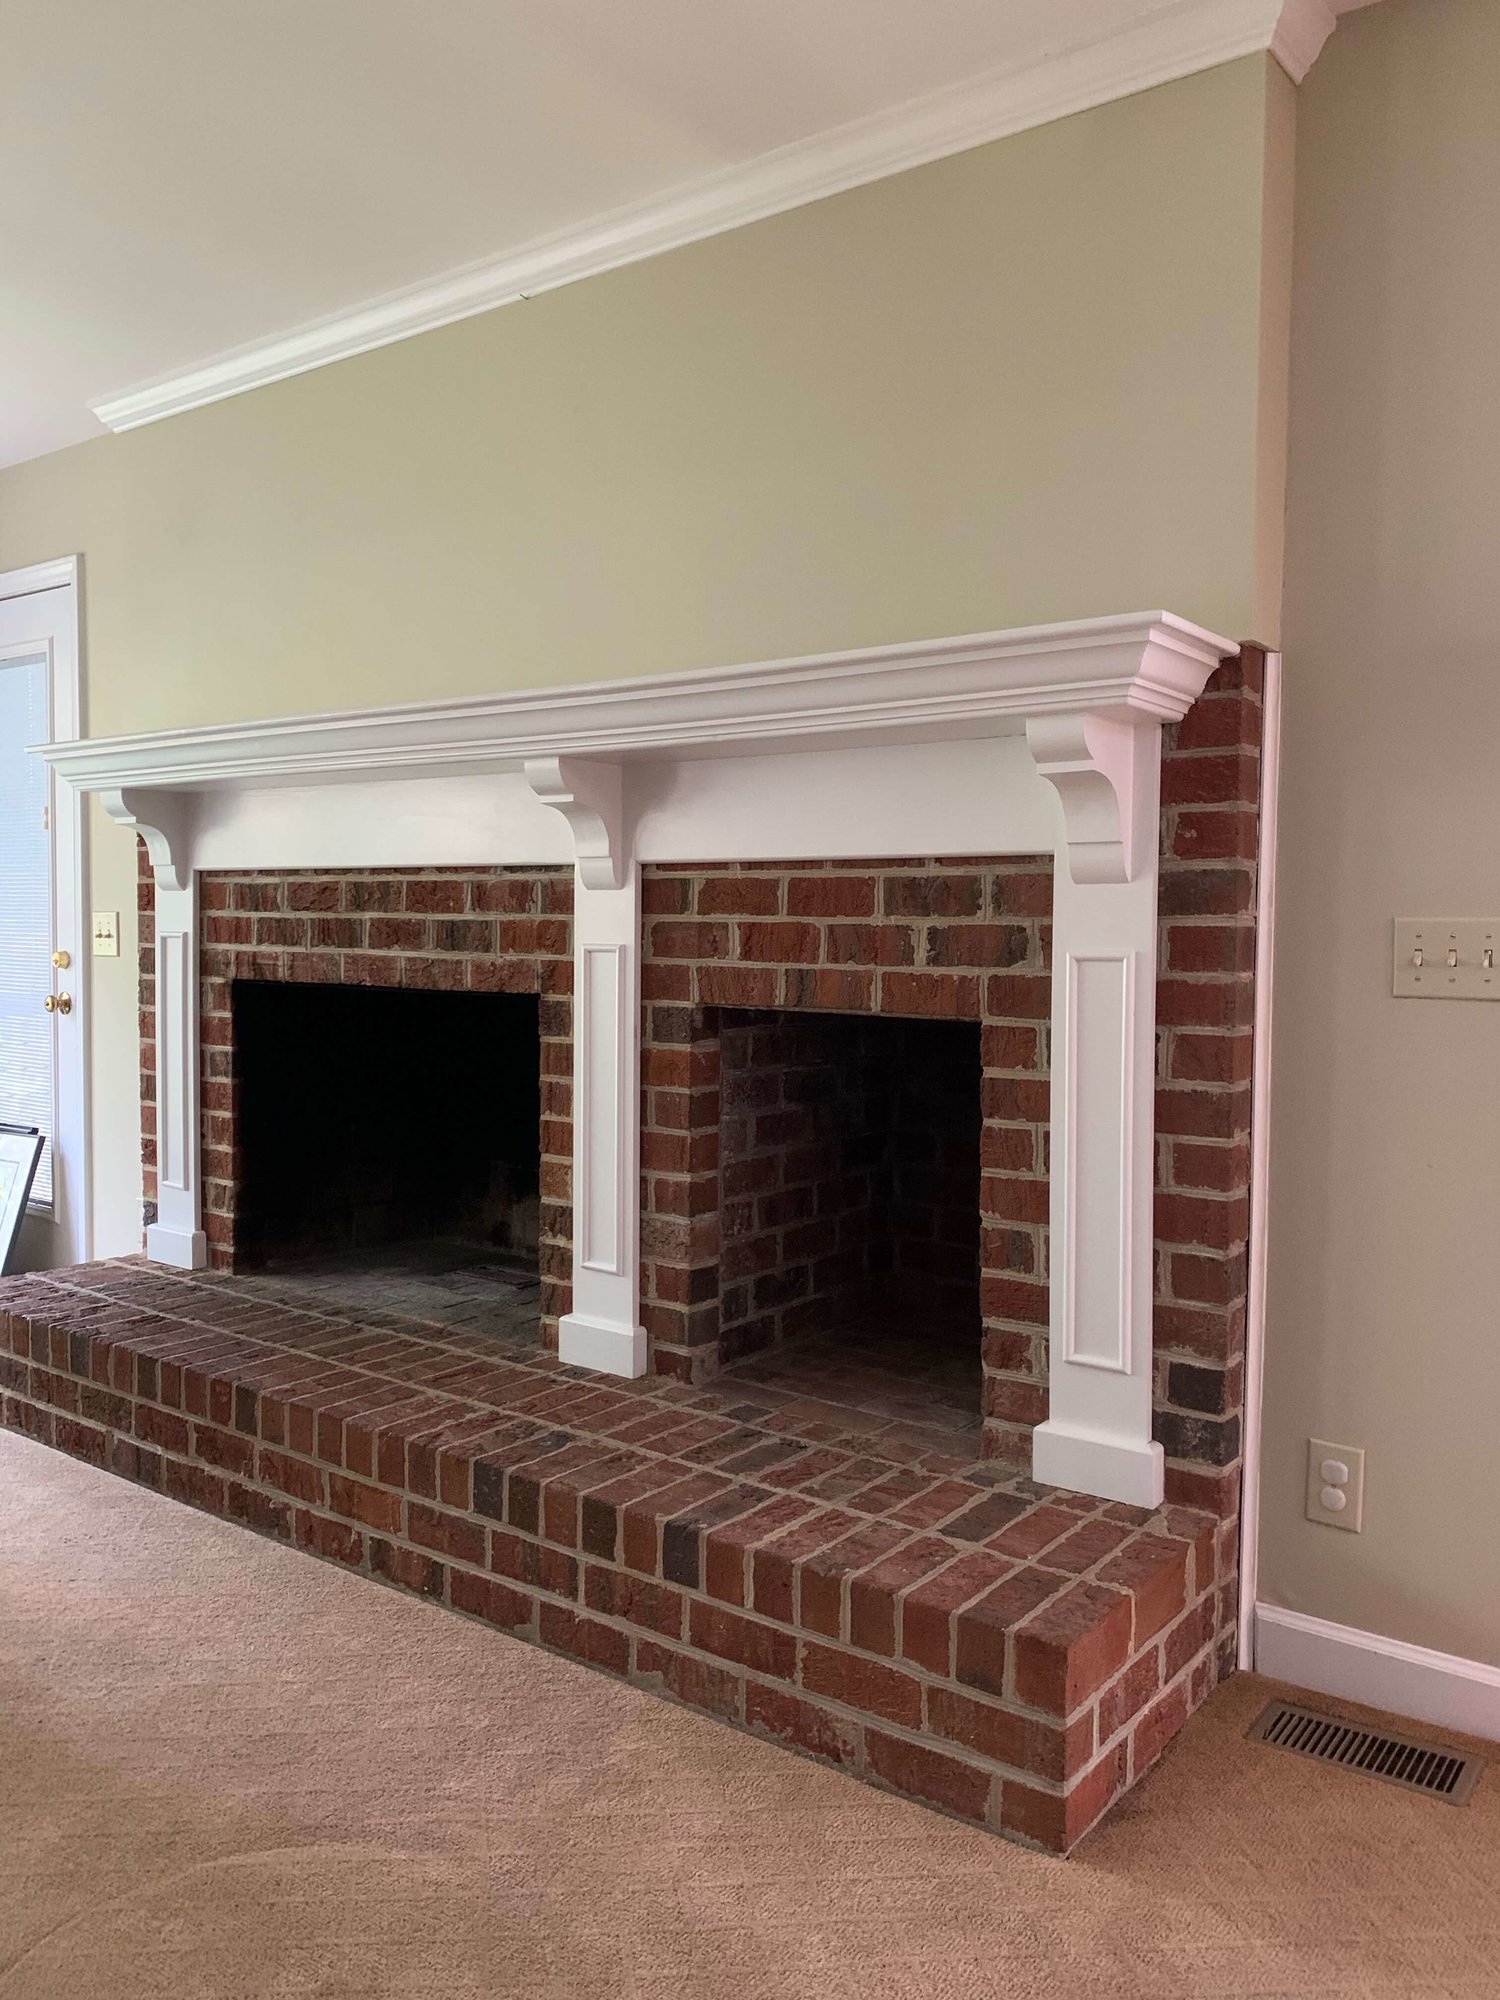 My Updated Fireplace Wall On A Budget, Covering A Brick Fireplace Wall